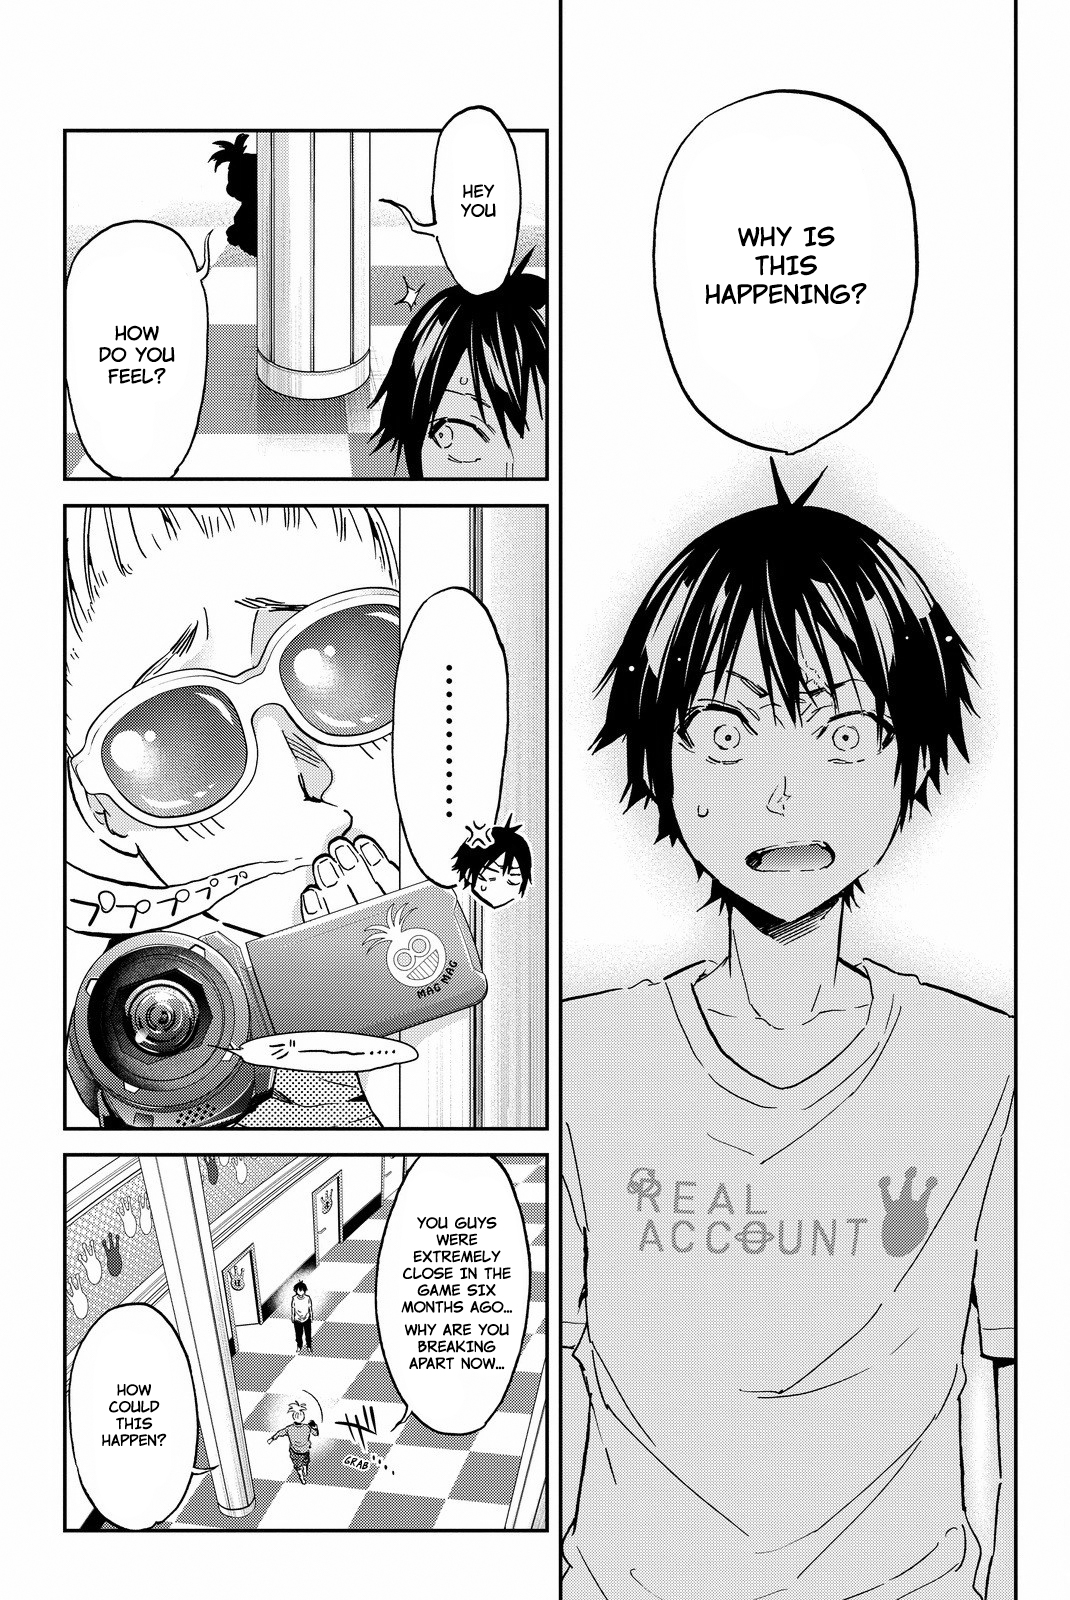 Real Account Vol. 12 Ch. 96 The Thing That Each of Us Should Do